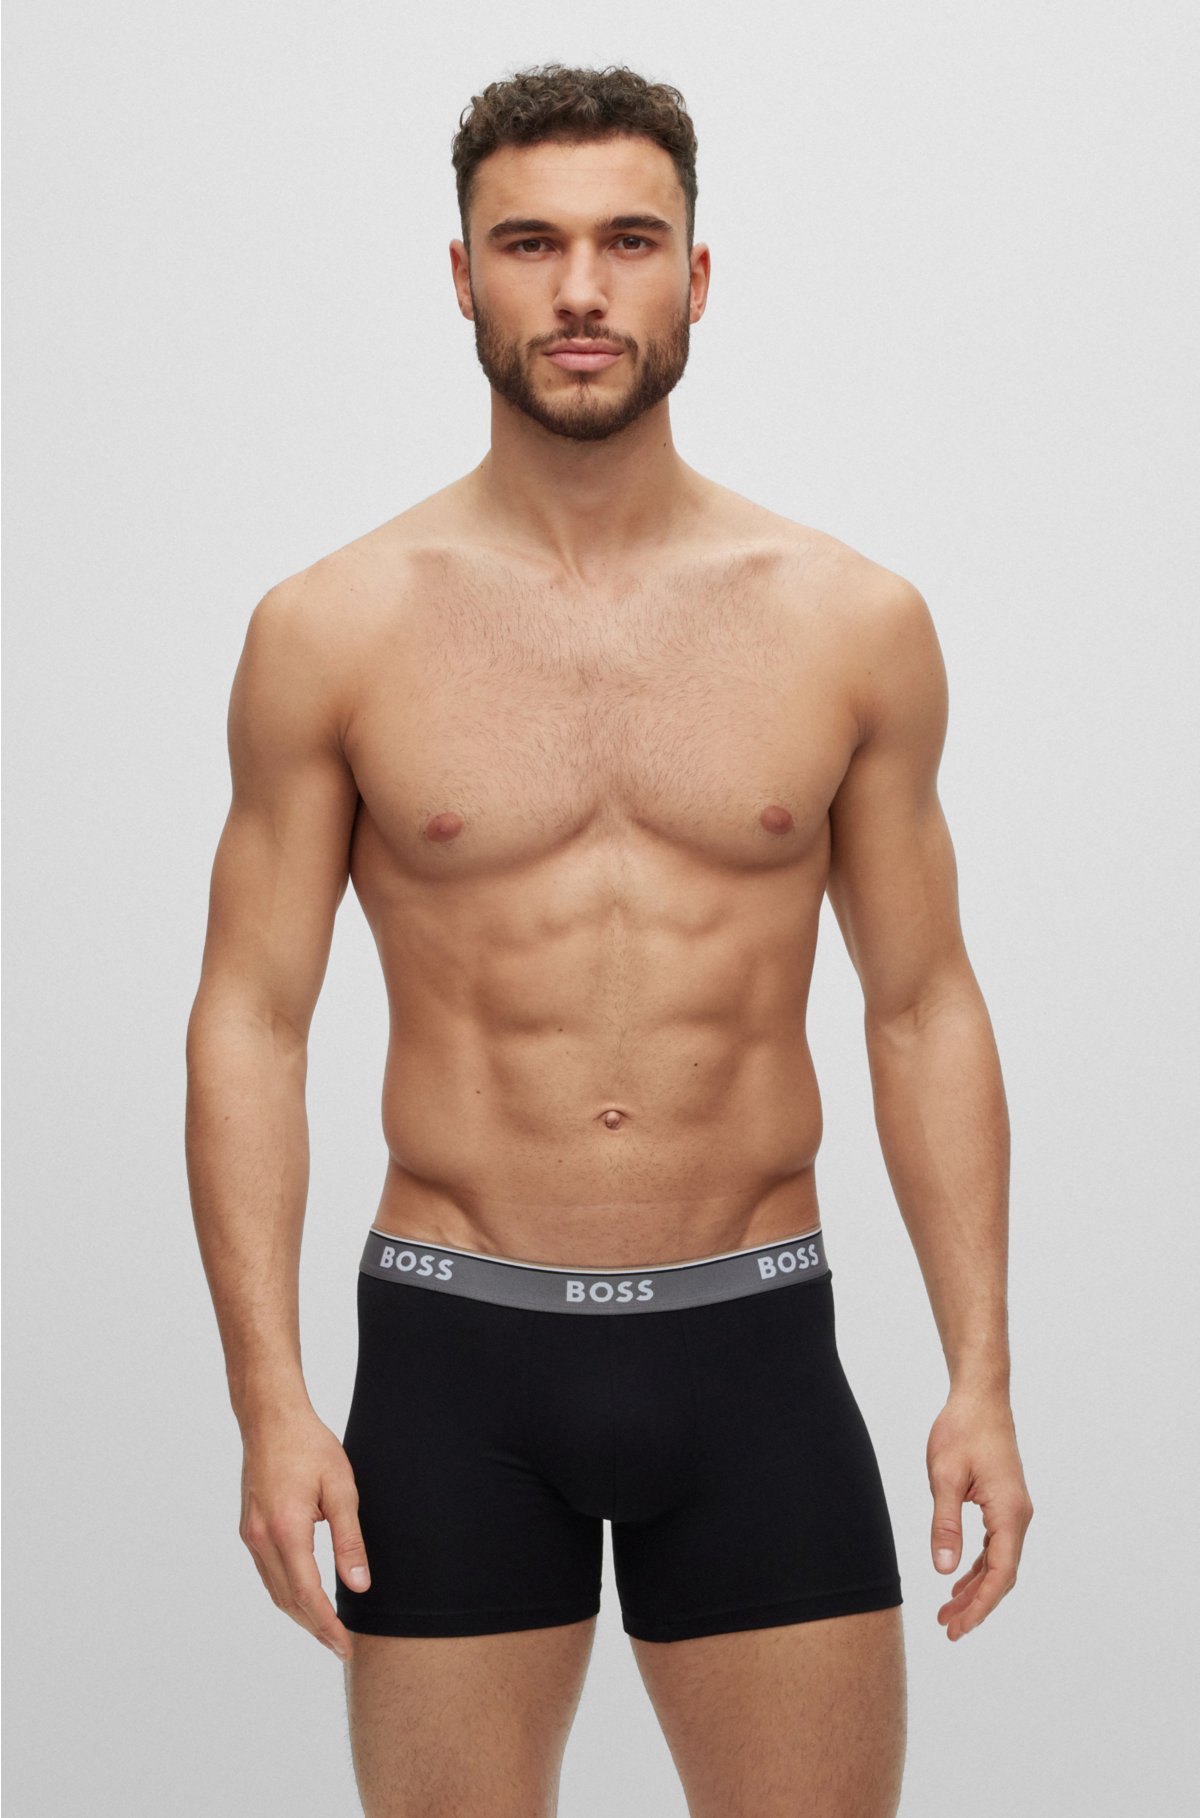 BOSS - Three-pack of briefs with logo boxer waistbands